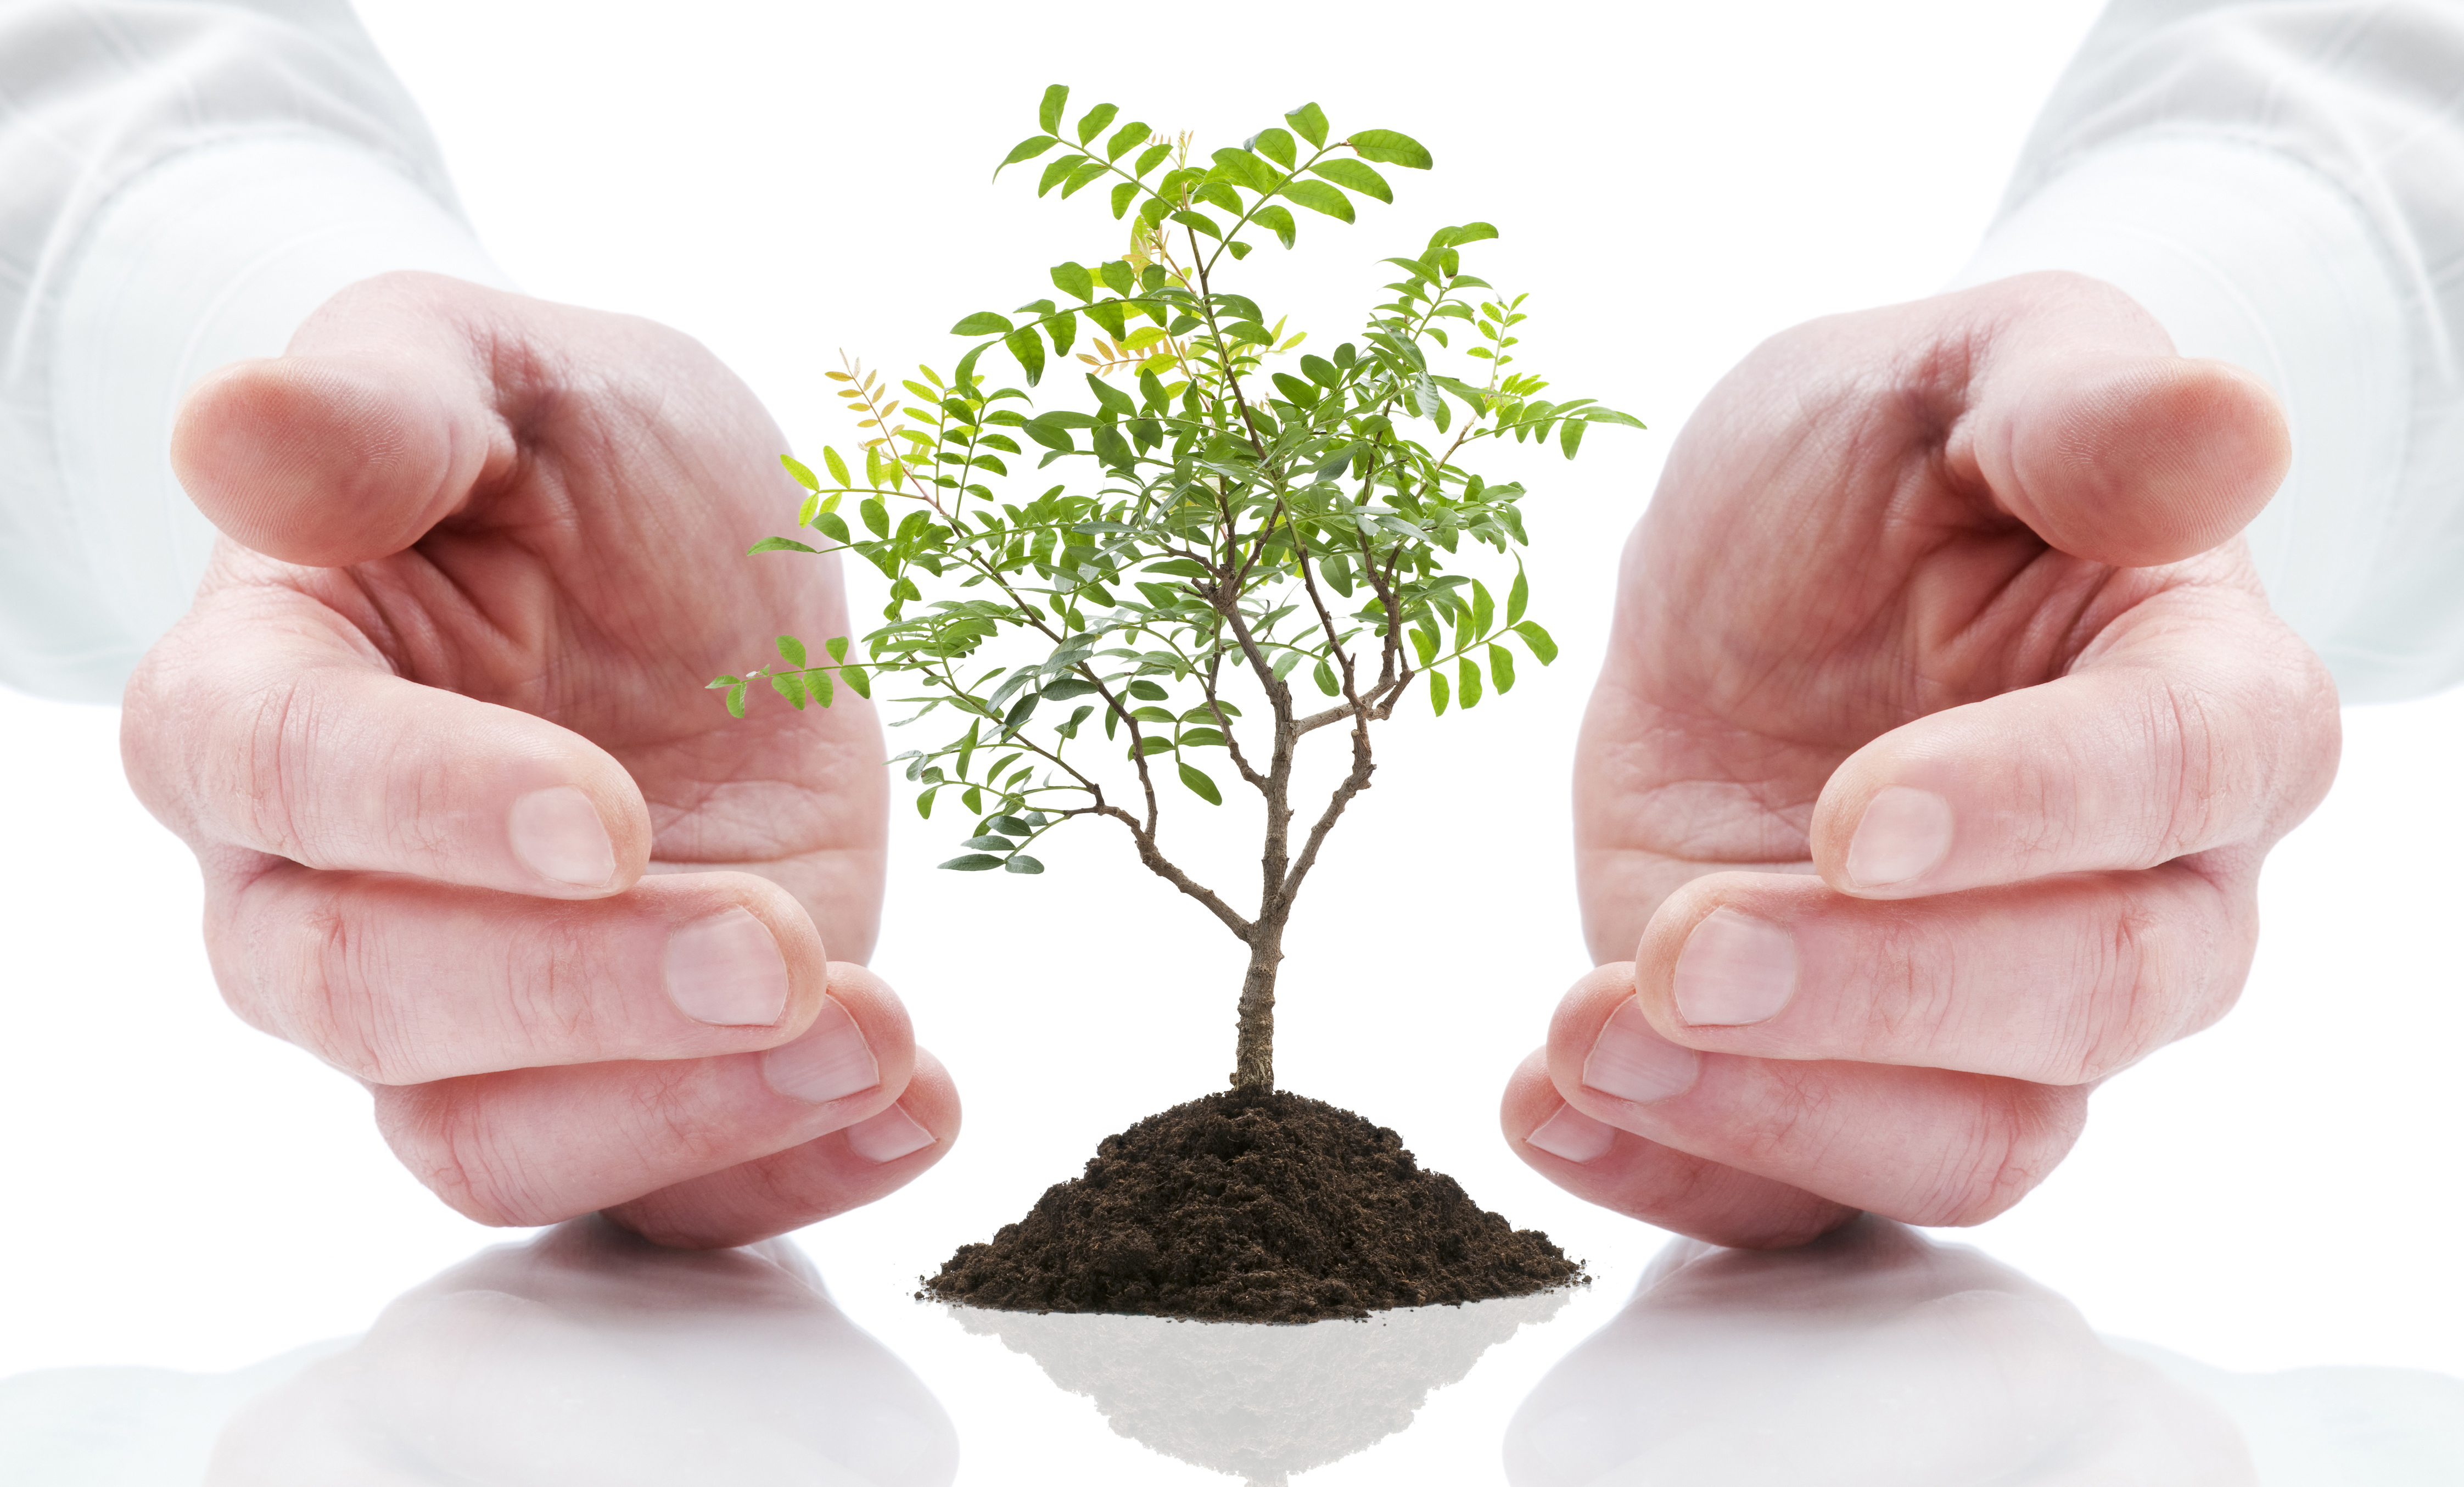 Hands and plant isolated on white background